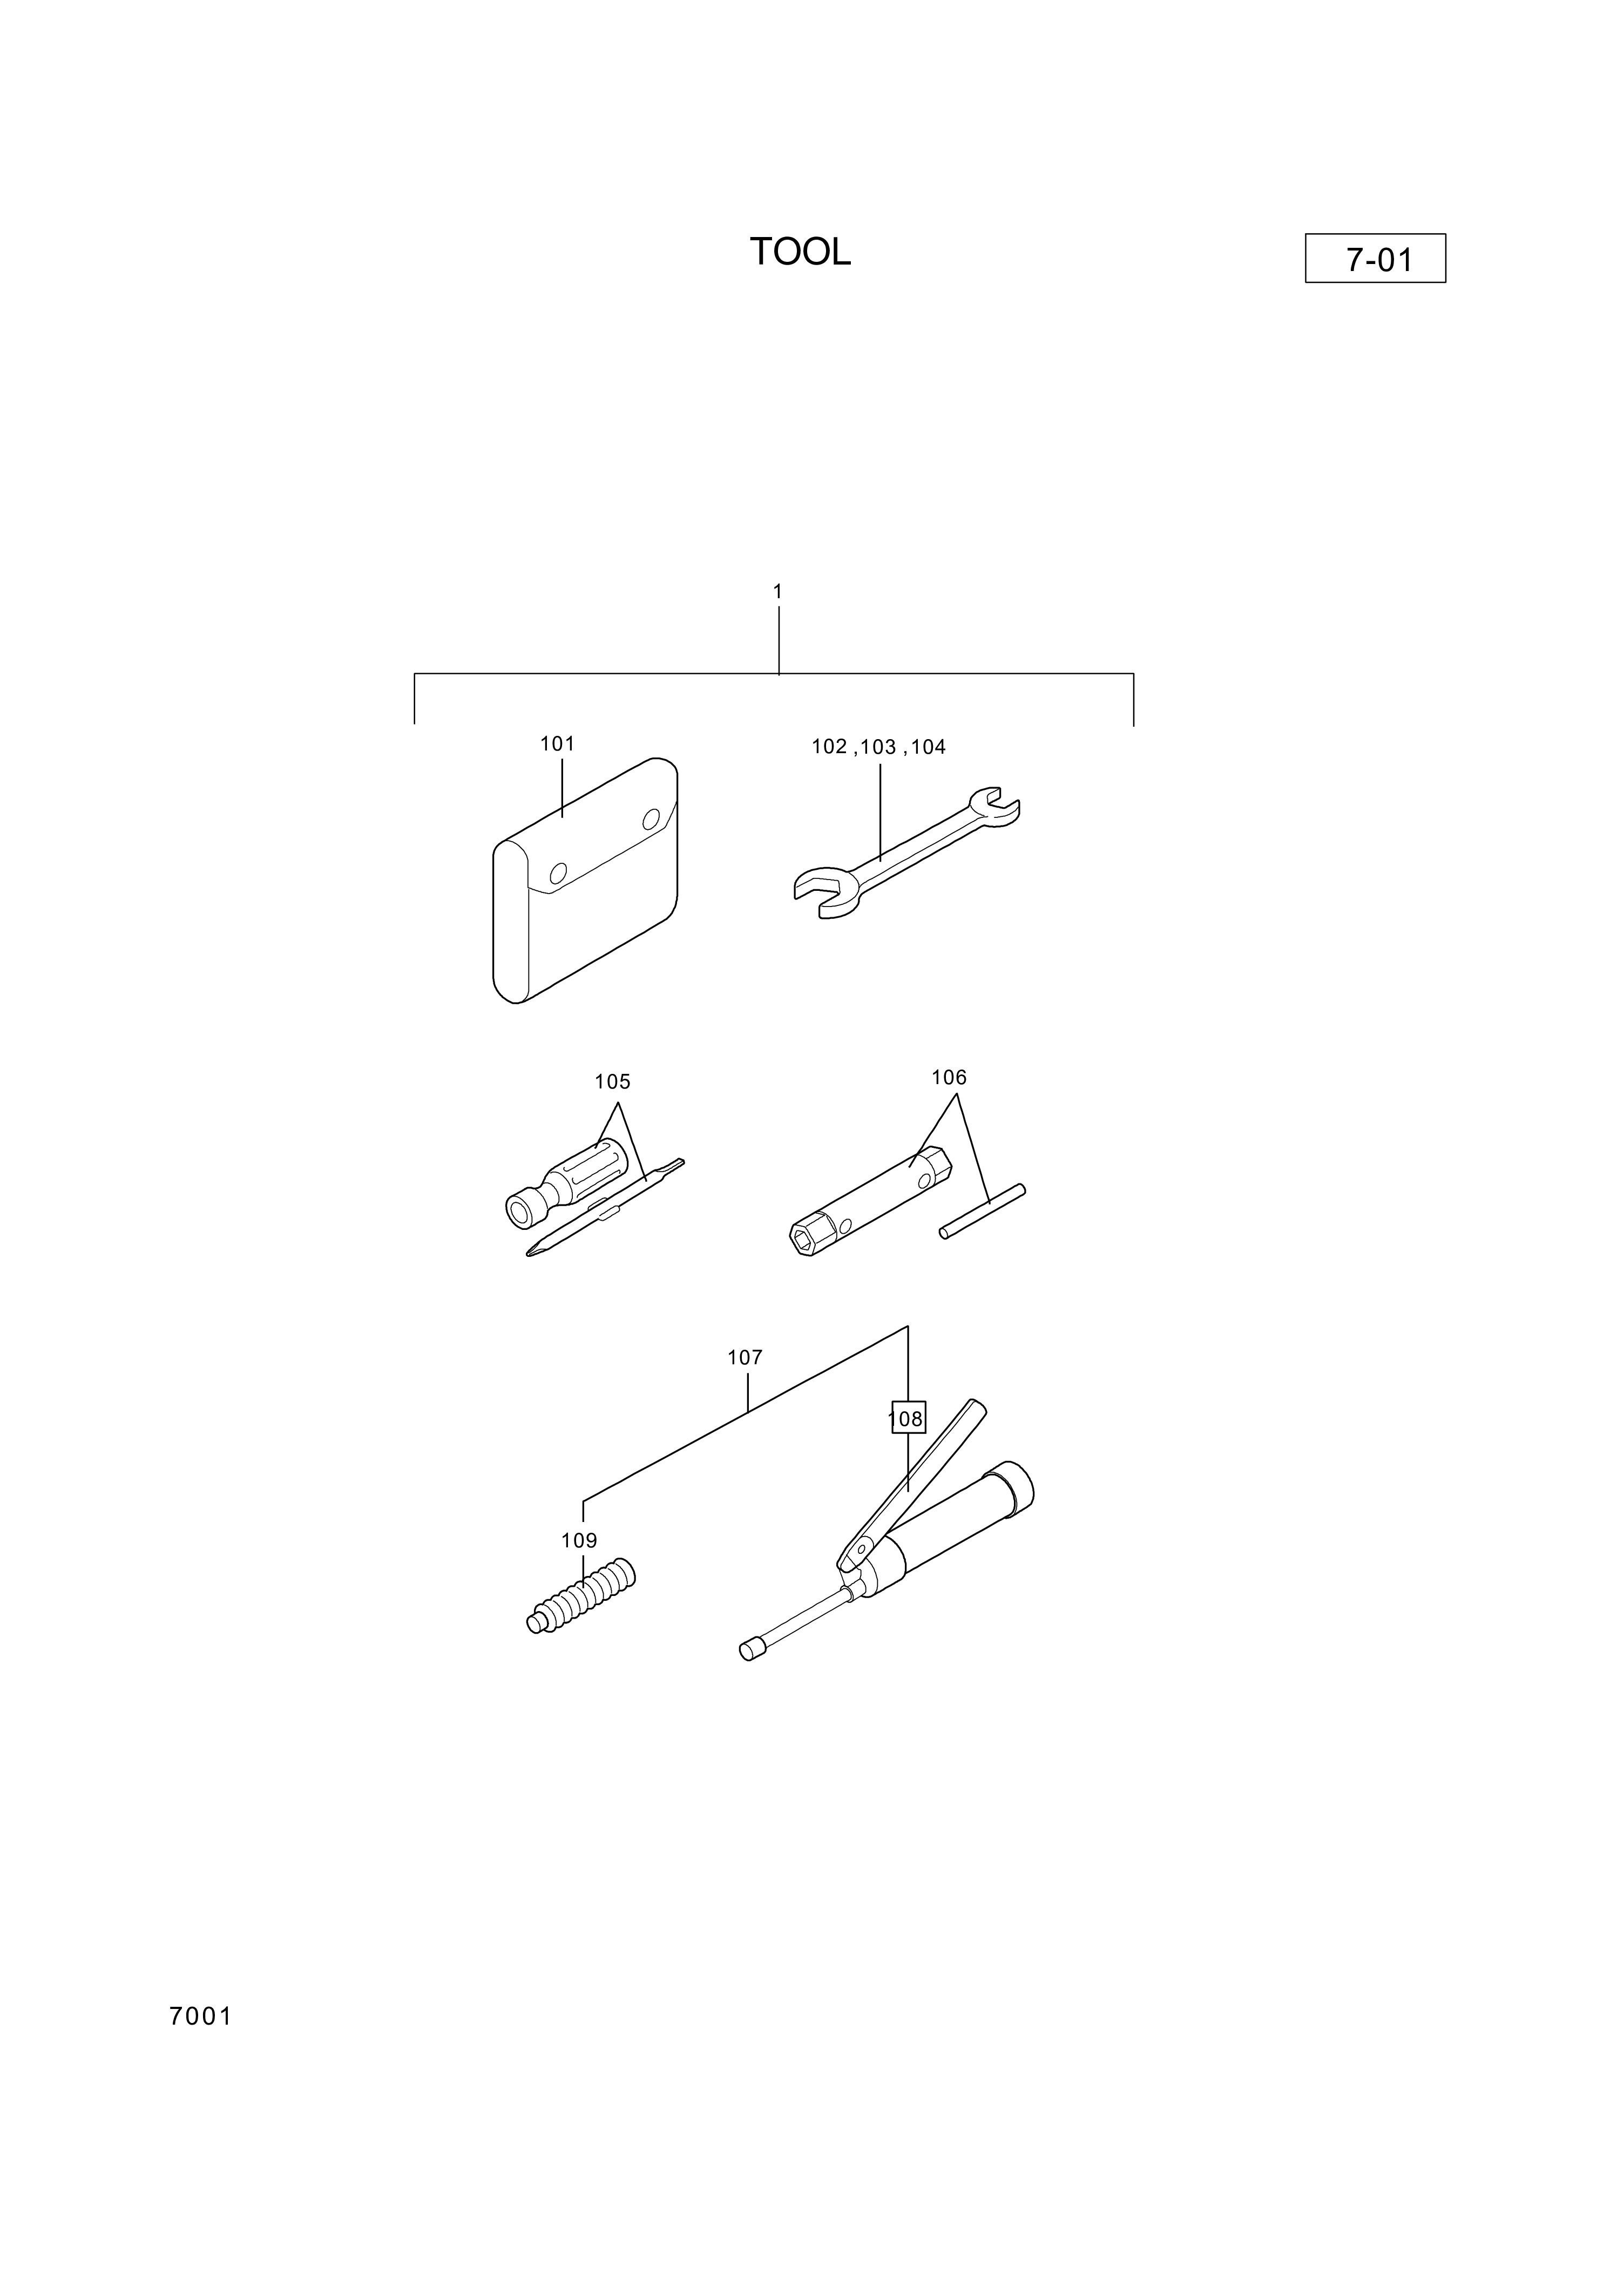 drawing for Hyundai Construction Equipment S071-00001 - TOOL ASSY (figure 3)